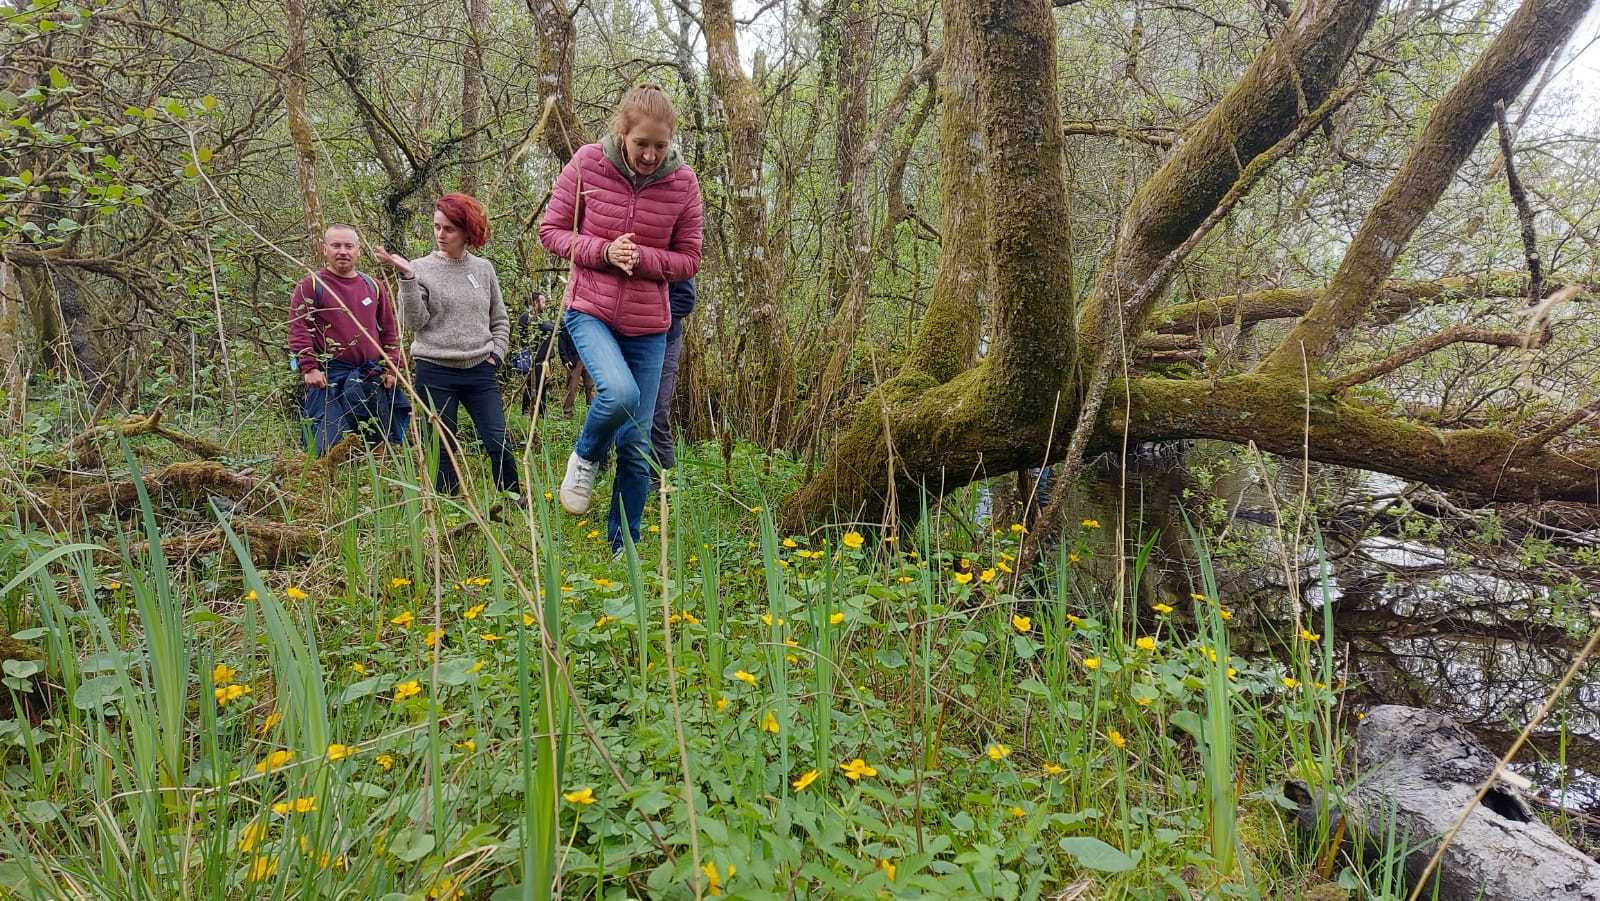 Participants of Biodiversity Training Course Walking through a wood with wildflowers